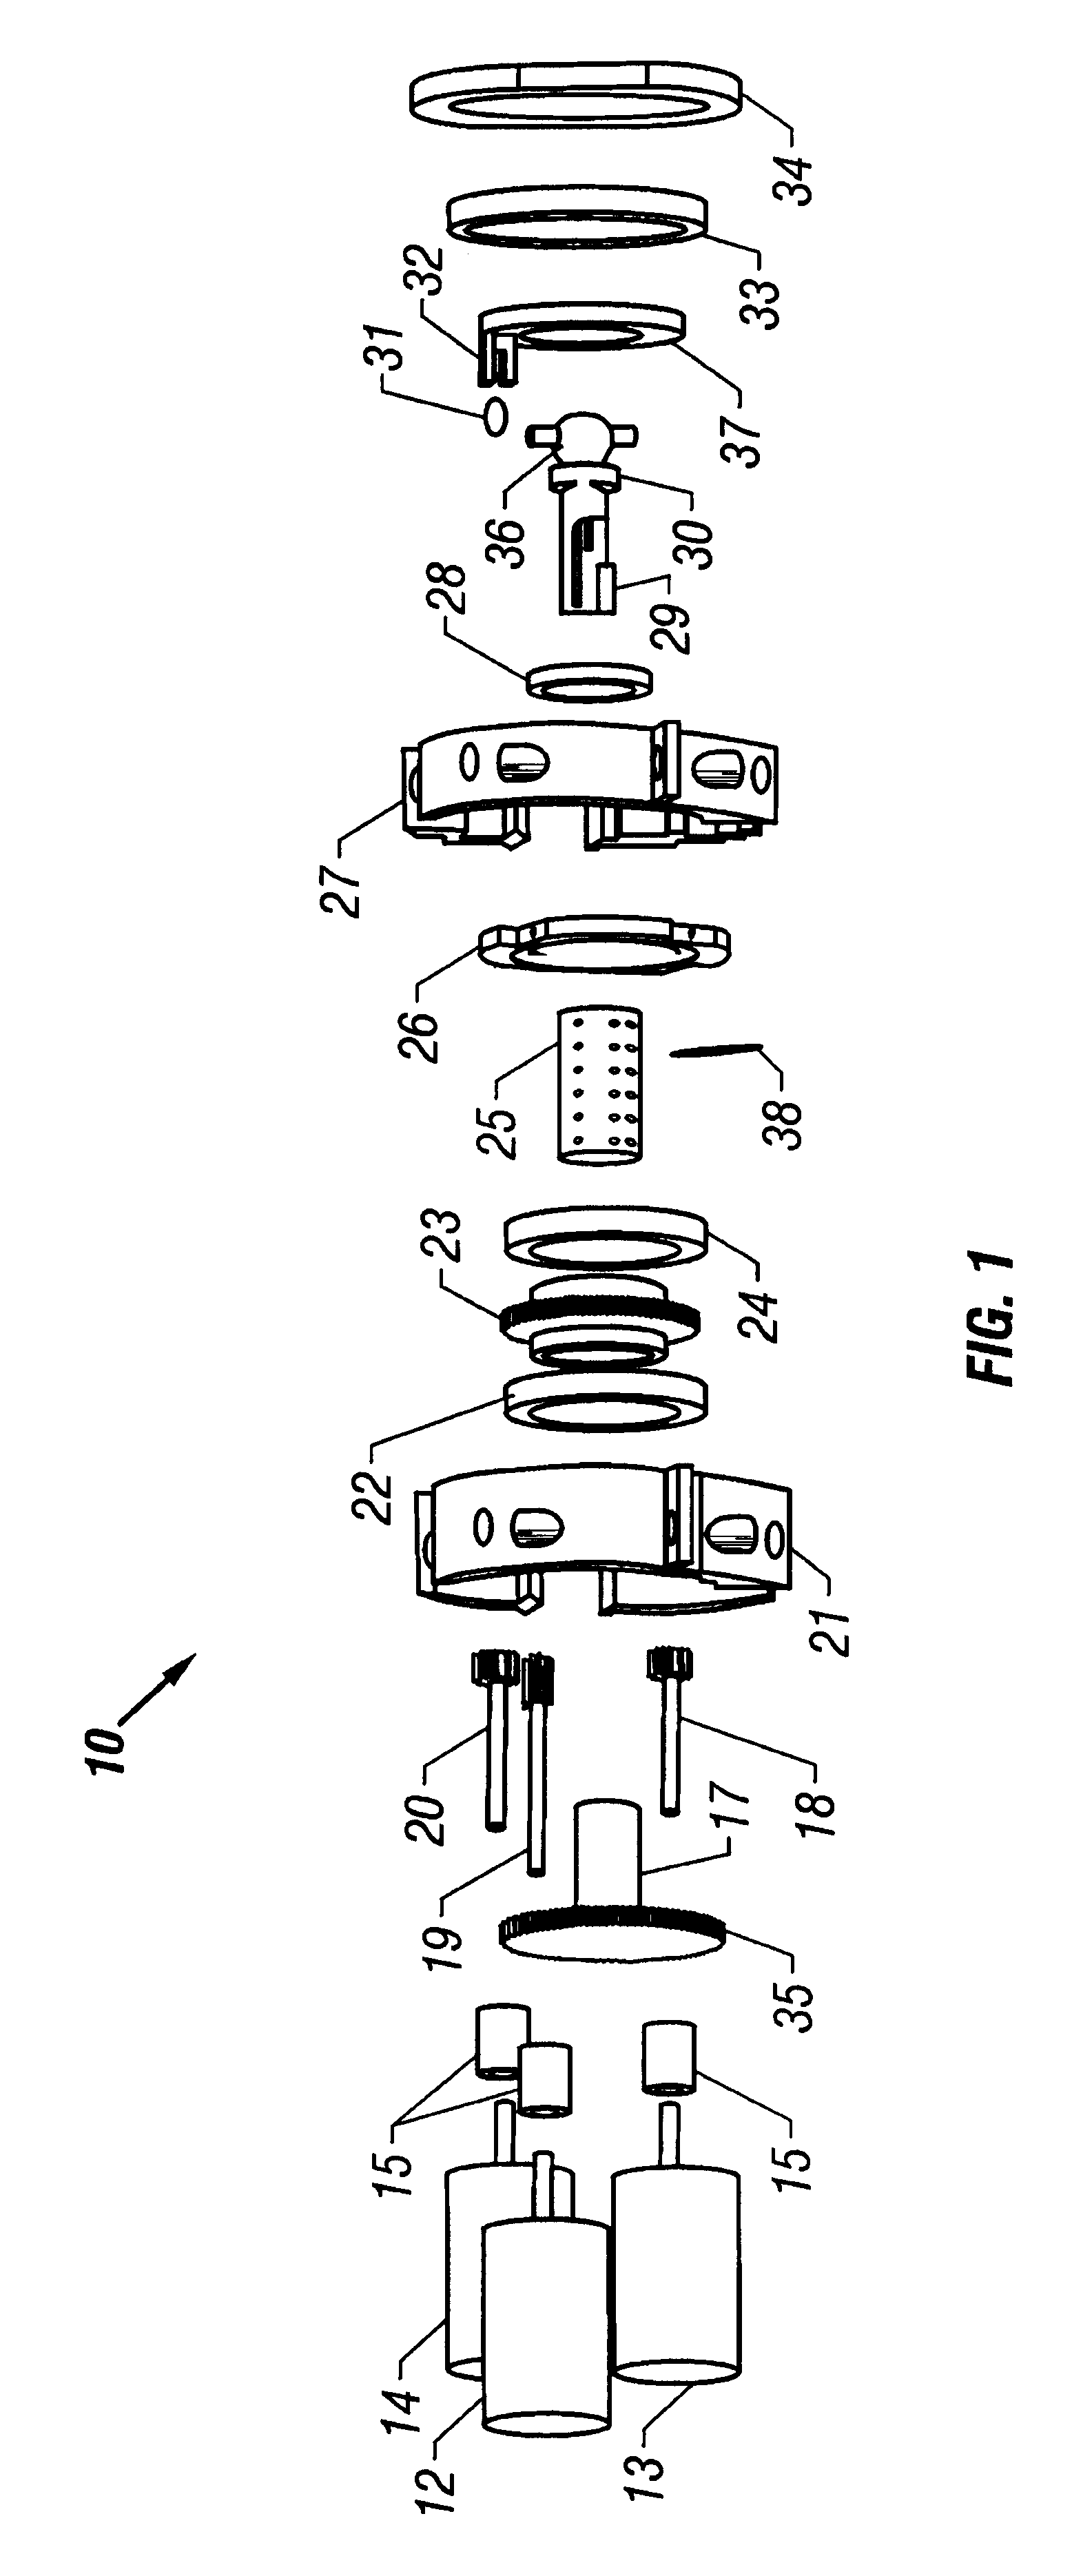 Methods and apparatus for swash plate guidance and control